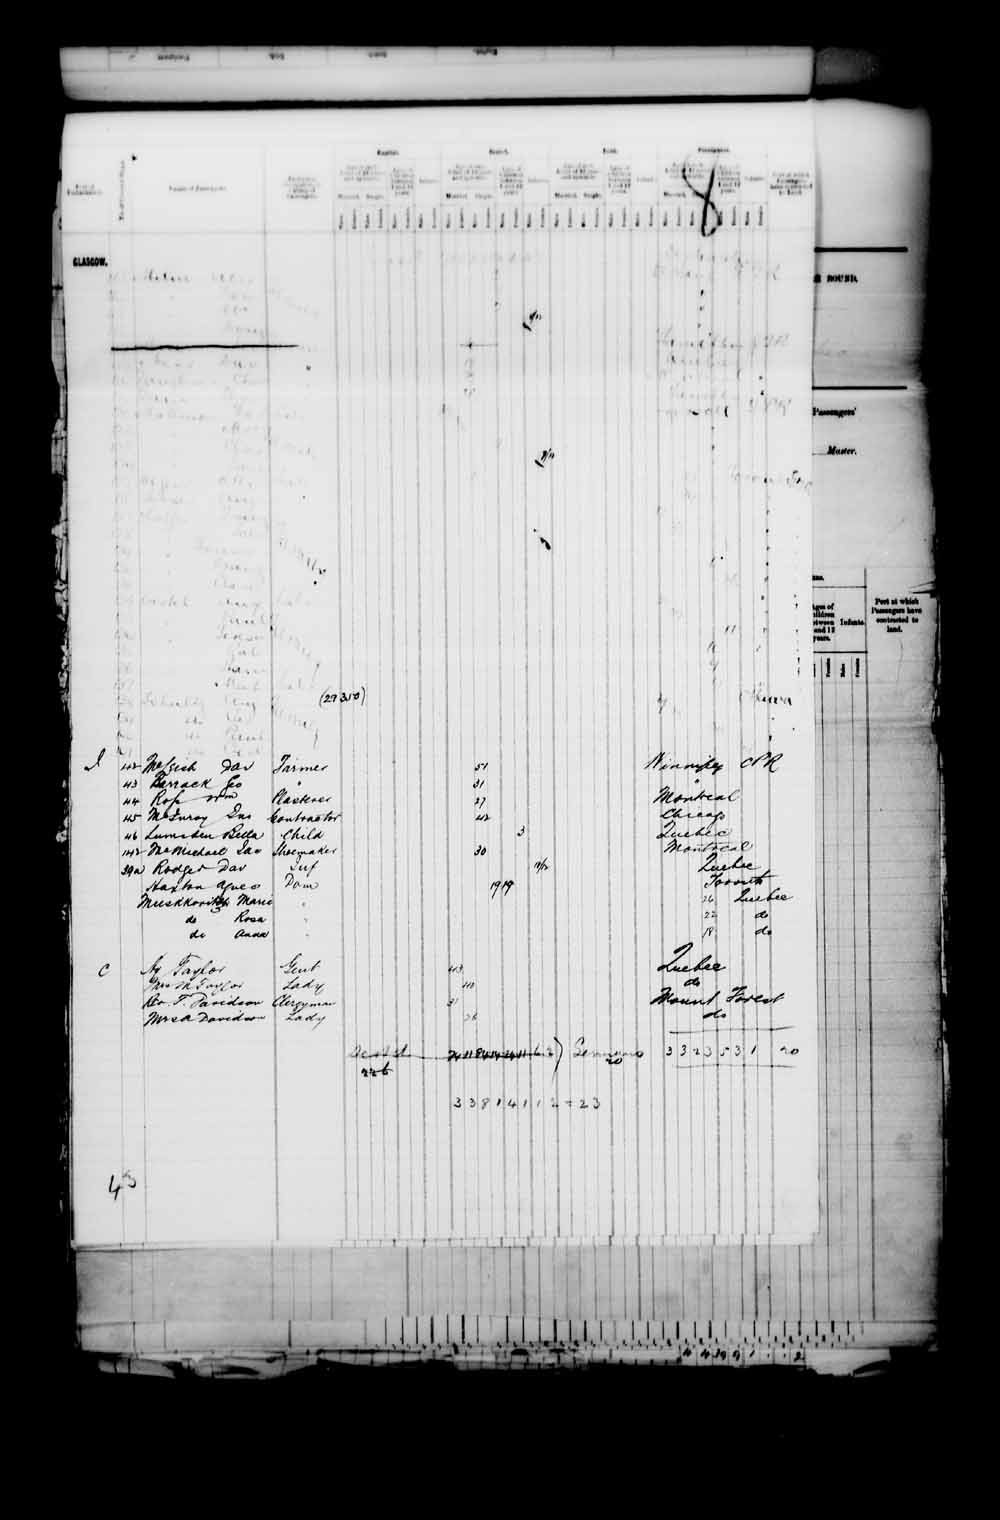 Digitized page of Passenger Lists for Image No.: e003546731